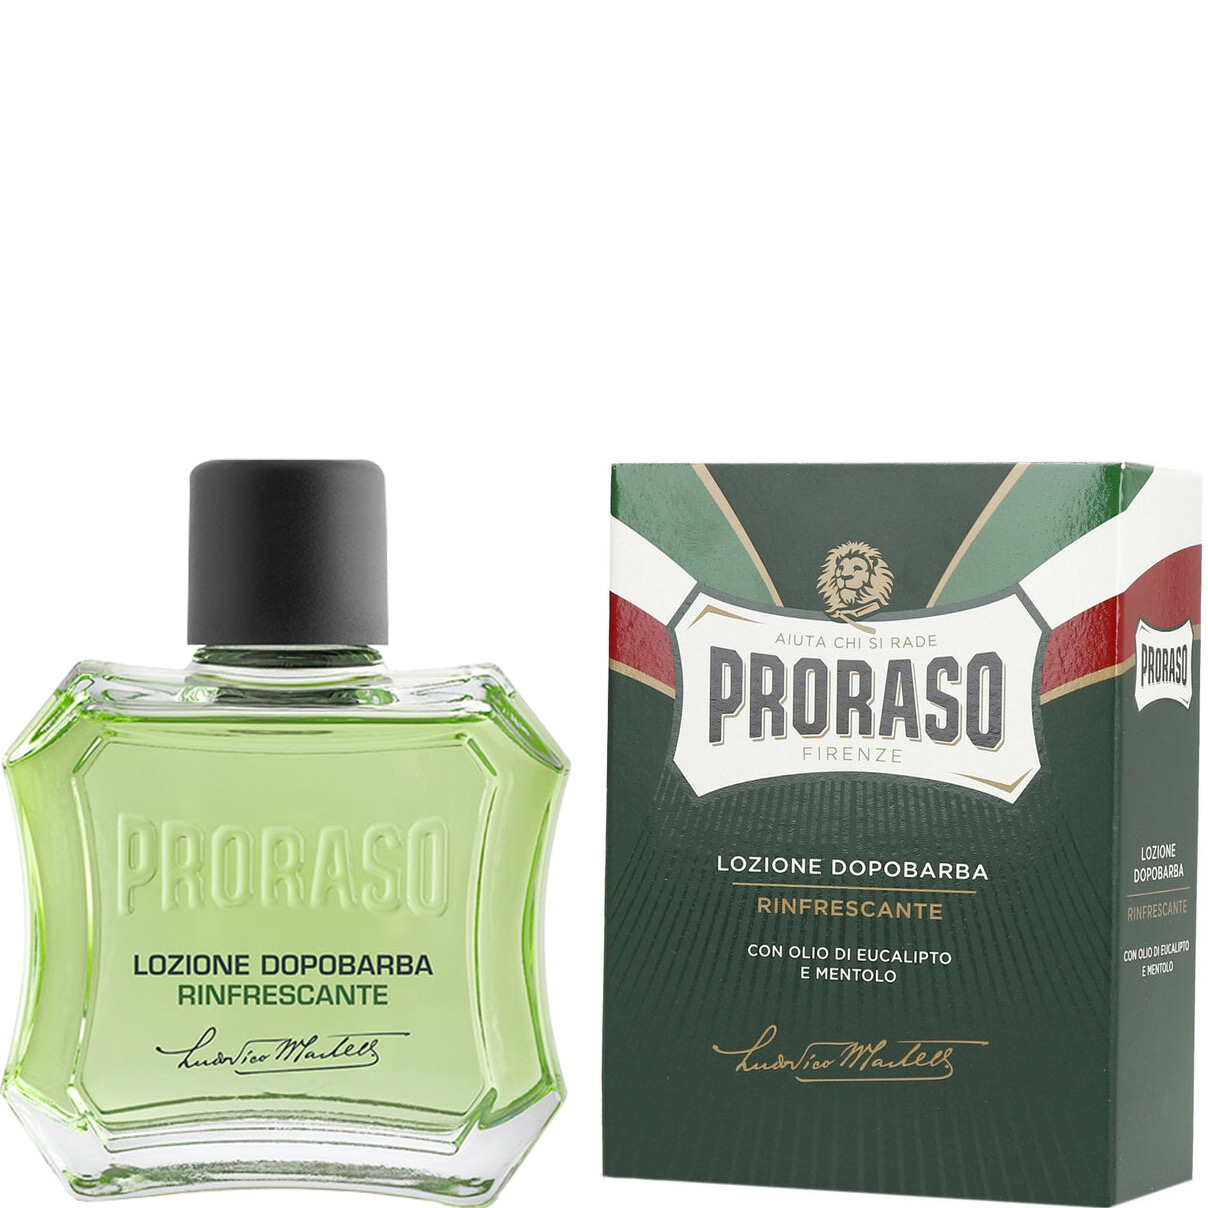 Proraso Aftershave Lotion Original 100ml - 1.1 - PRO-400970